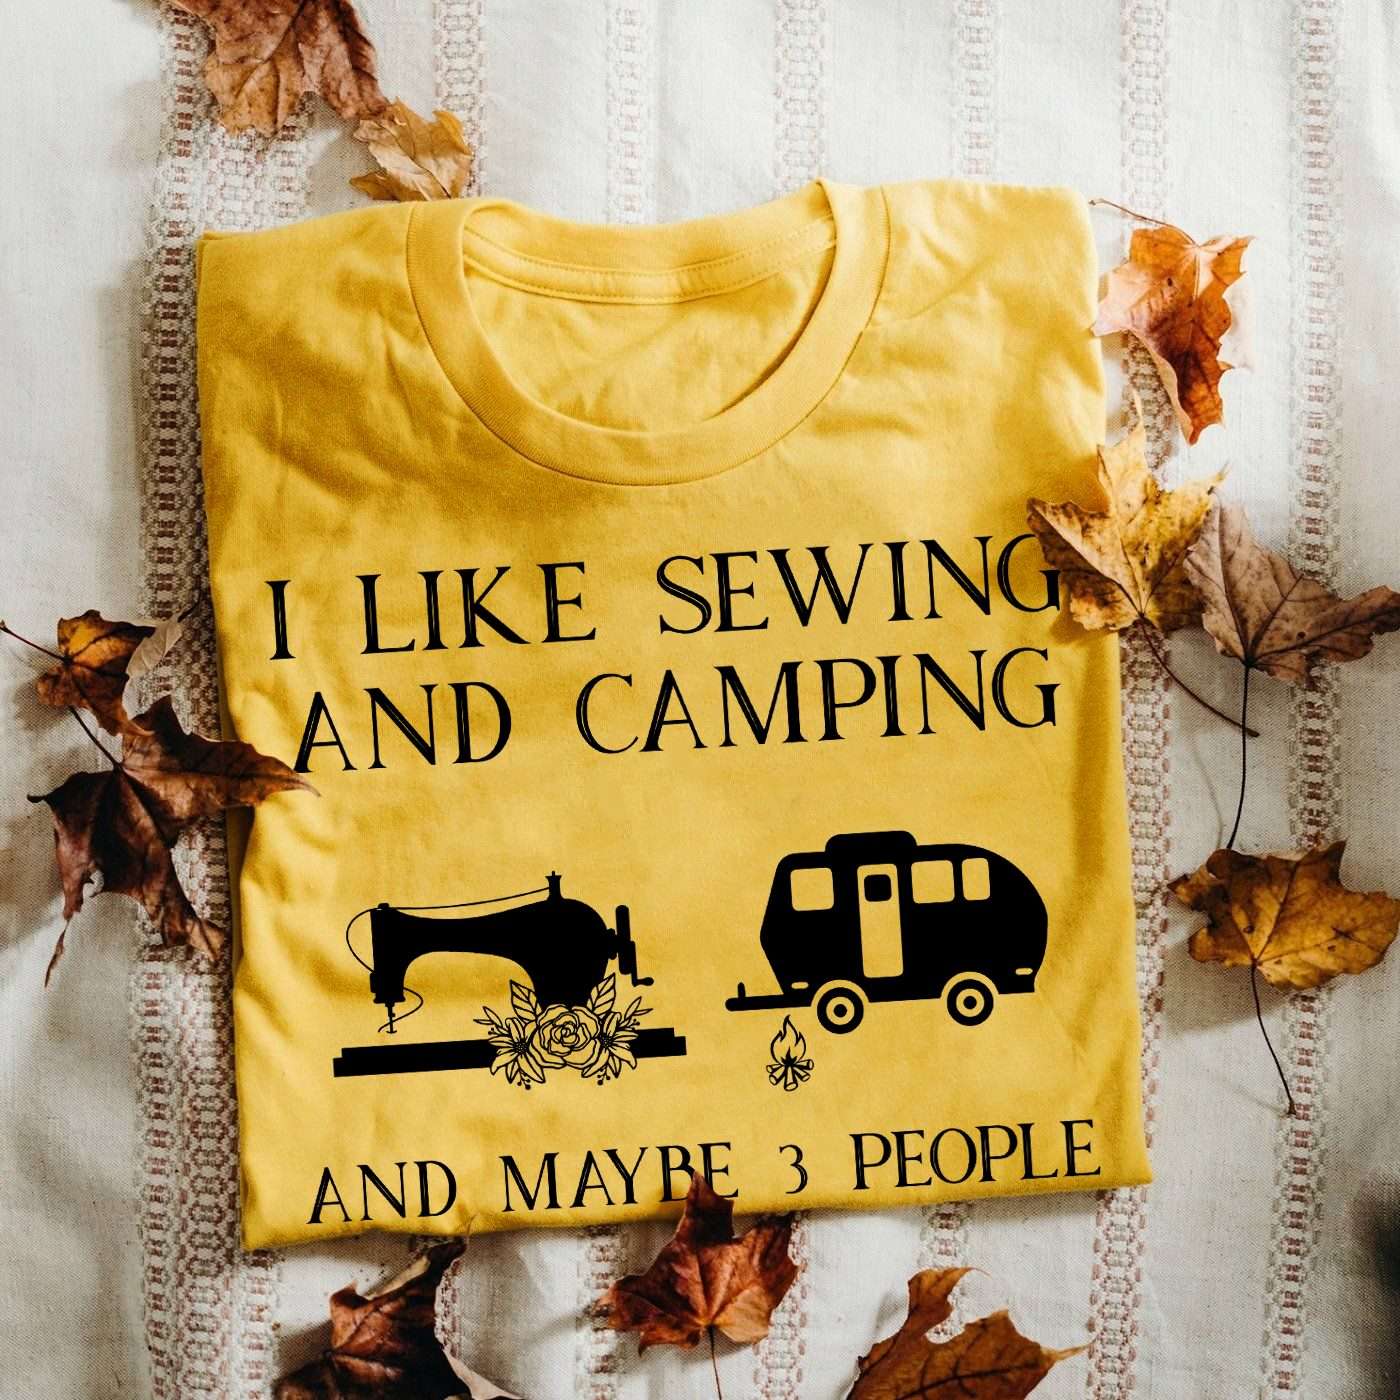 I like sewing and camping and maybe 3 people - Sewing machine, camping car